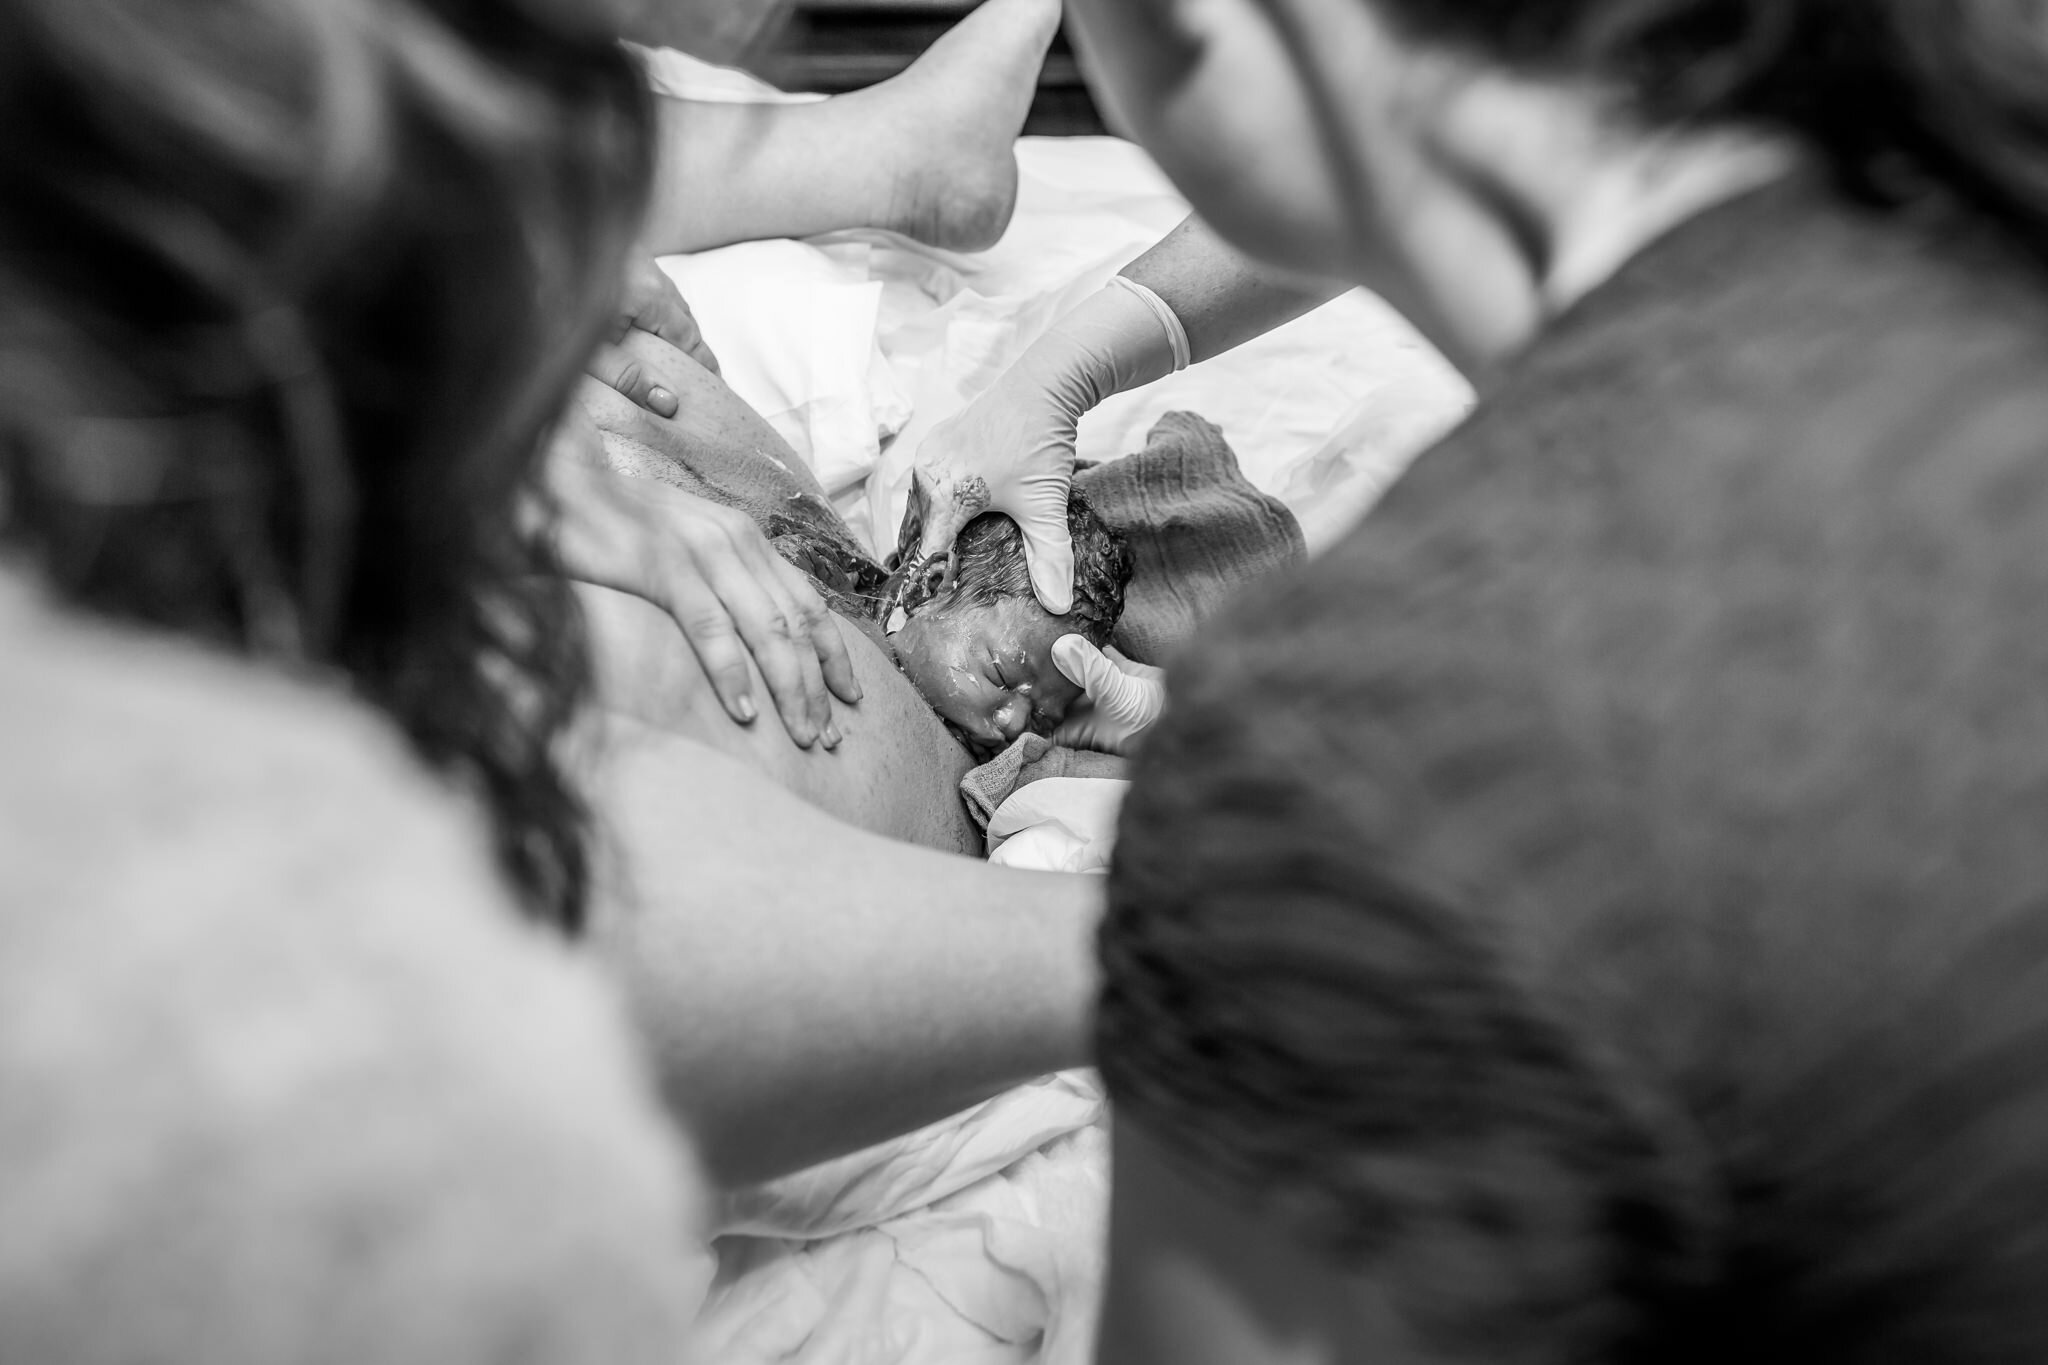 midwife guiding baby out of vagina during birth story birth